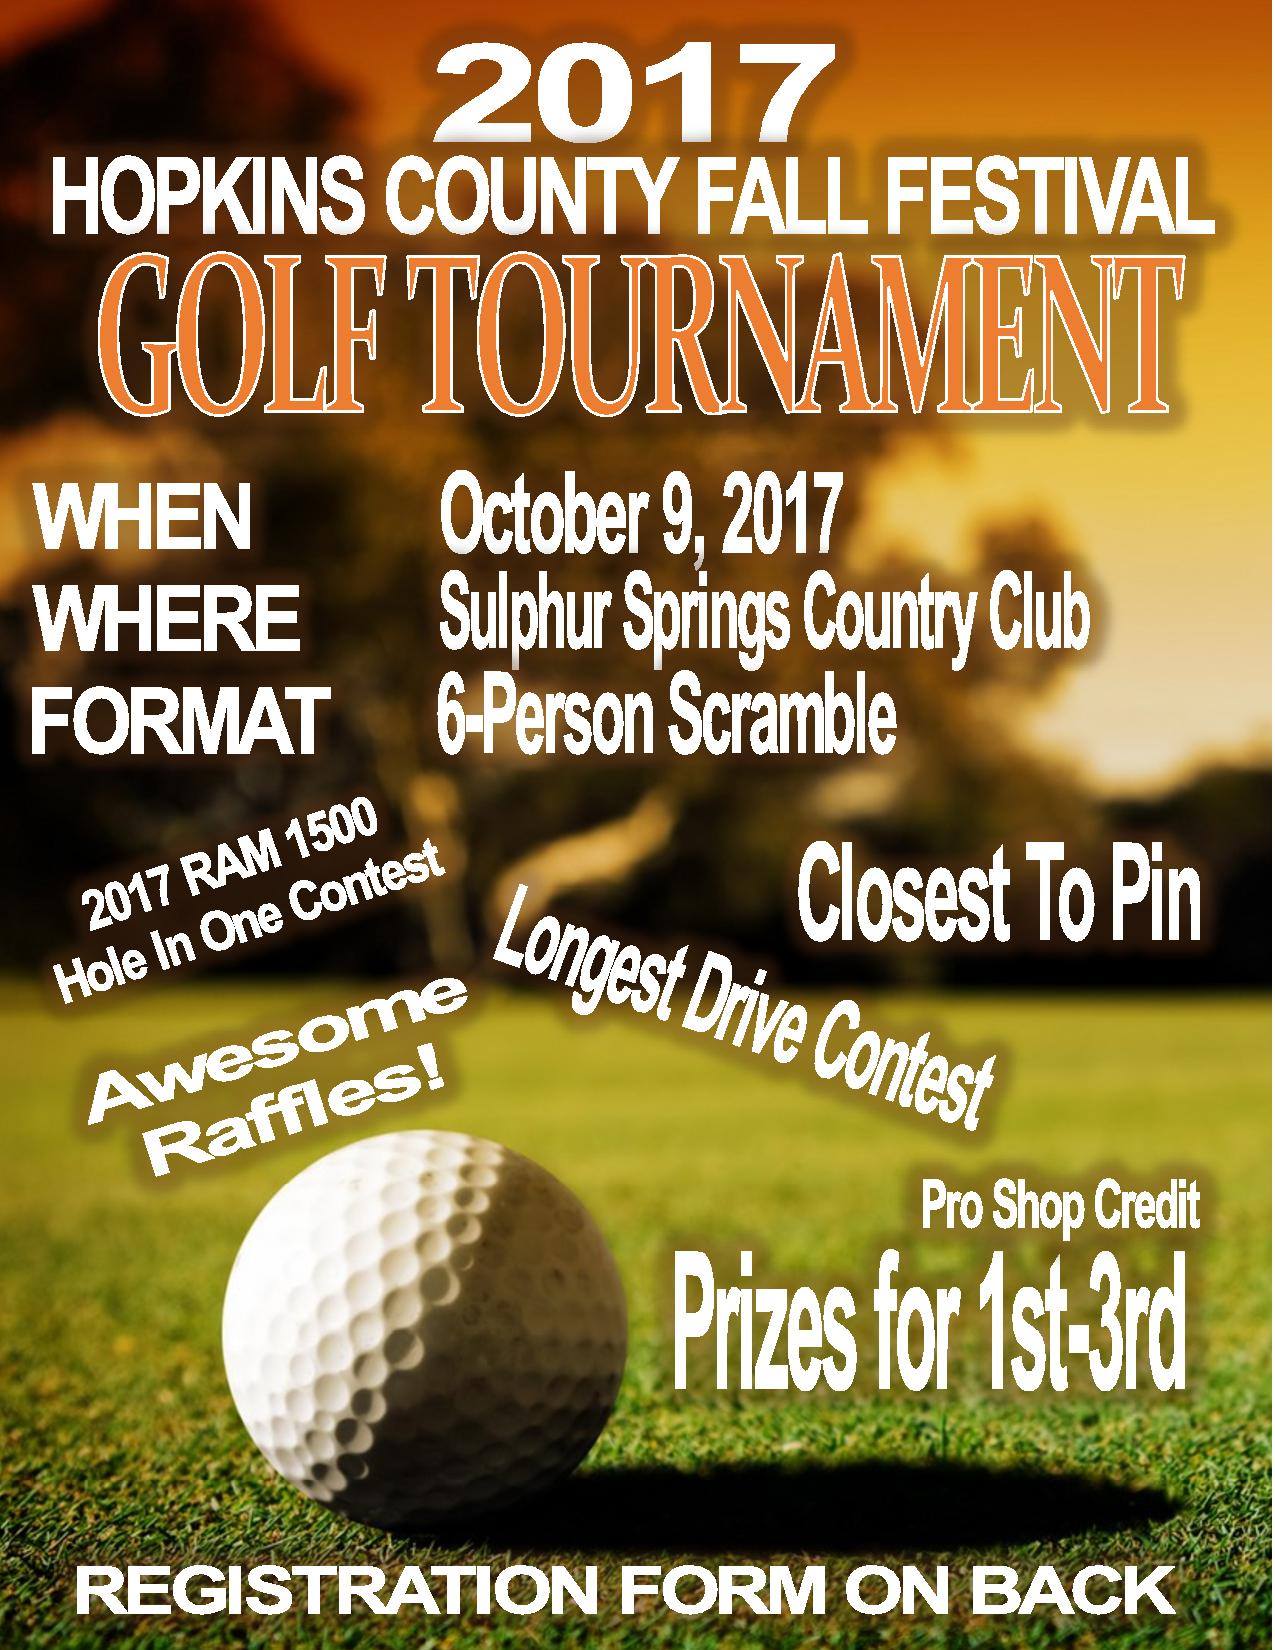 Time Running Out to Register for Fall Festival Golf Tournament on October 9th